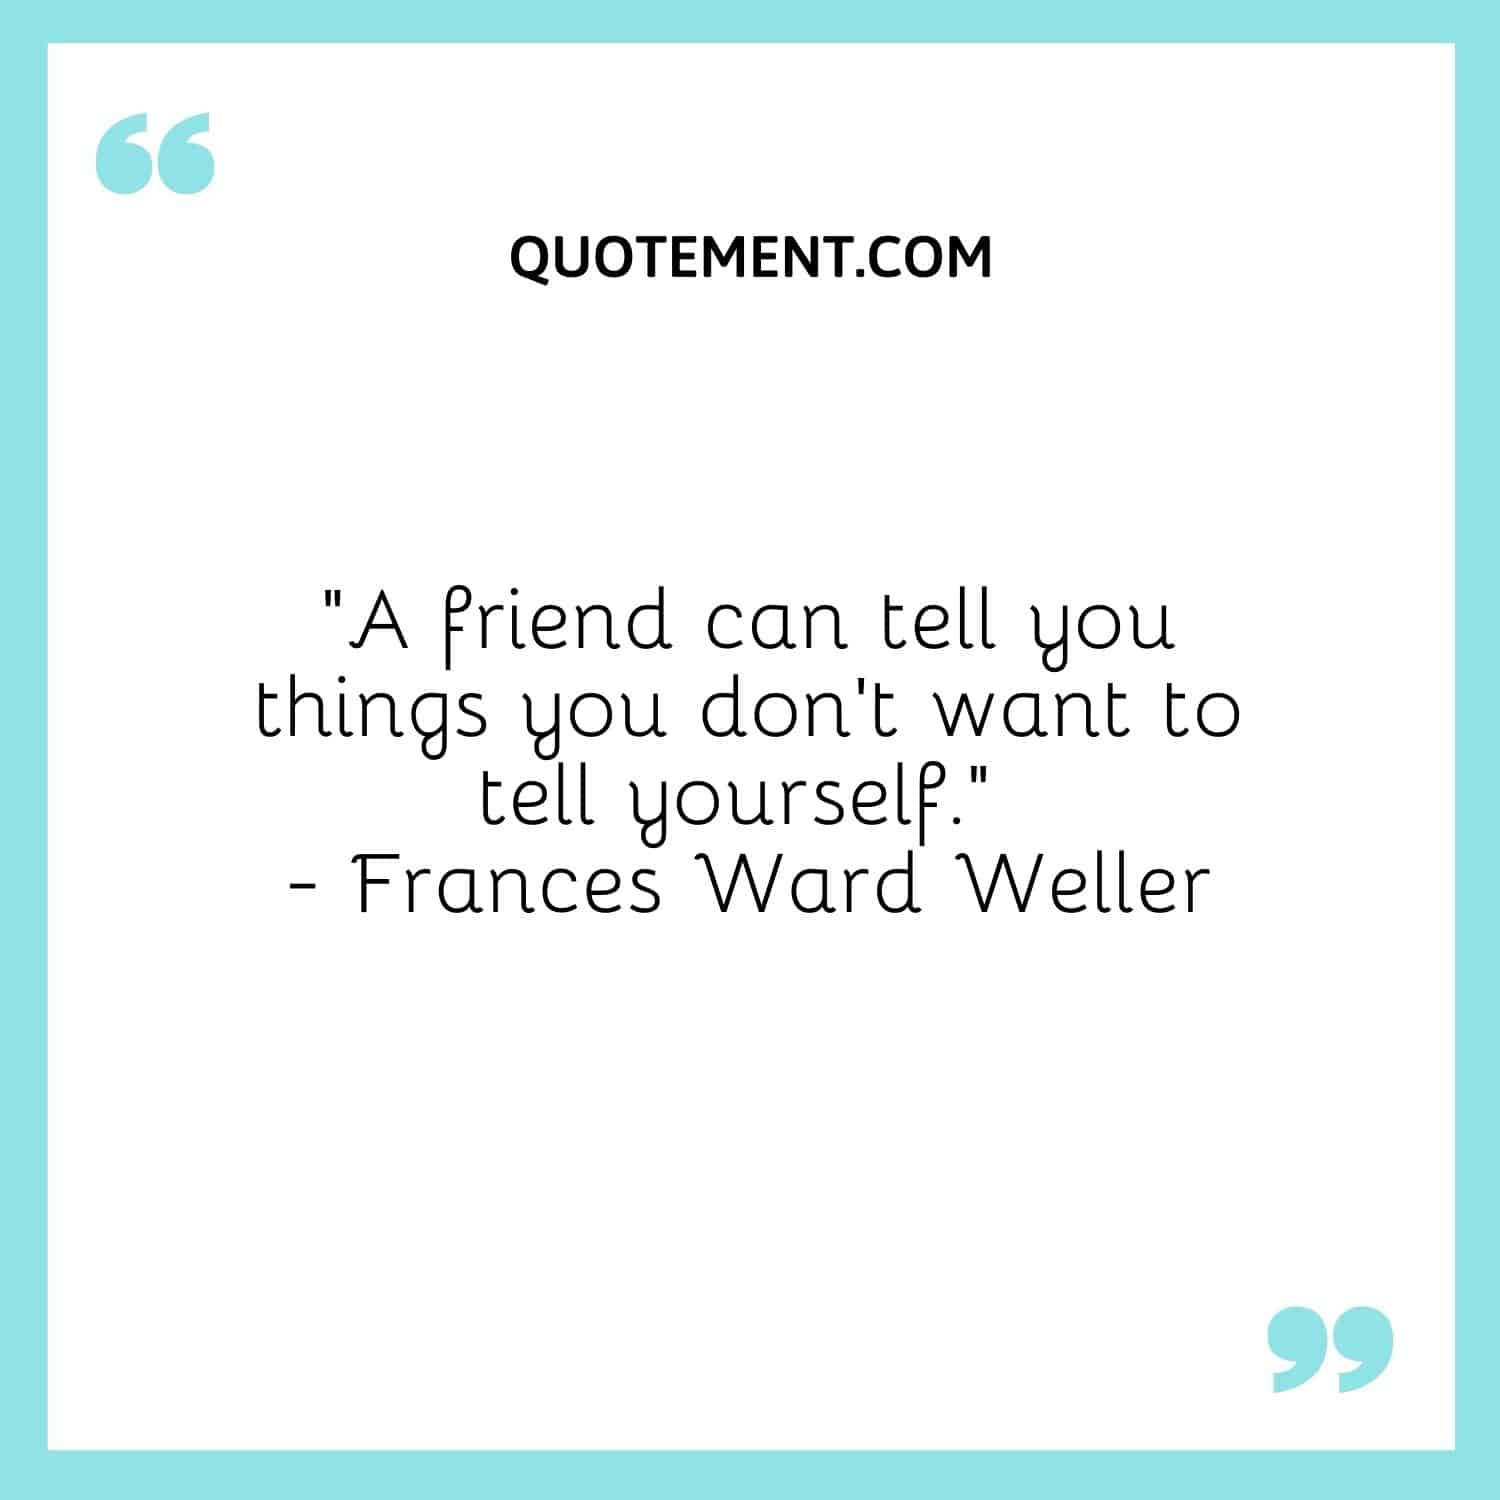 A friend can tell you things you don't want to tell yourself.